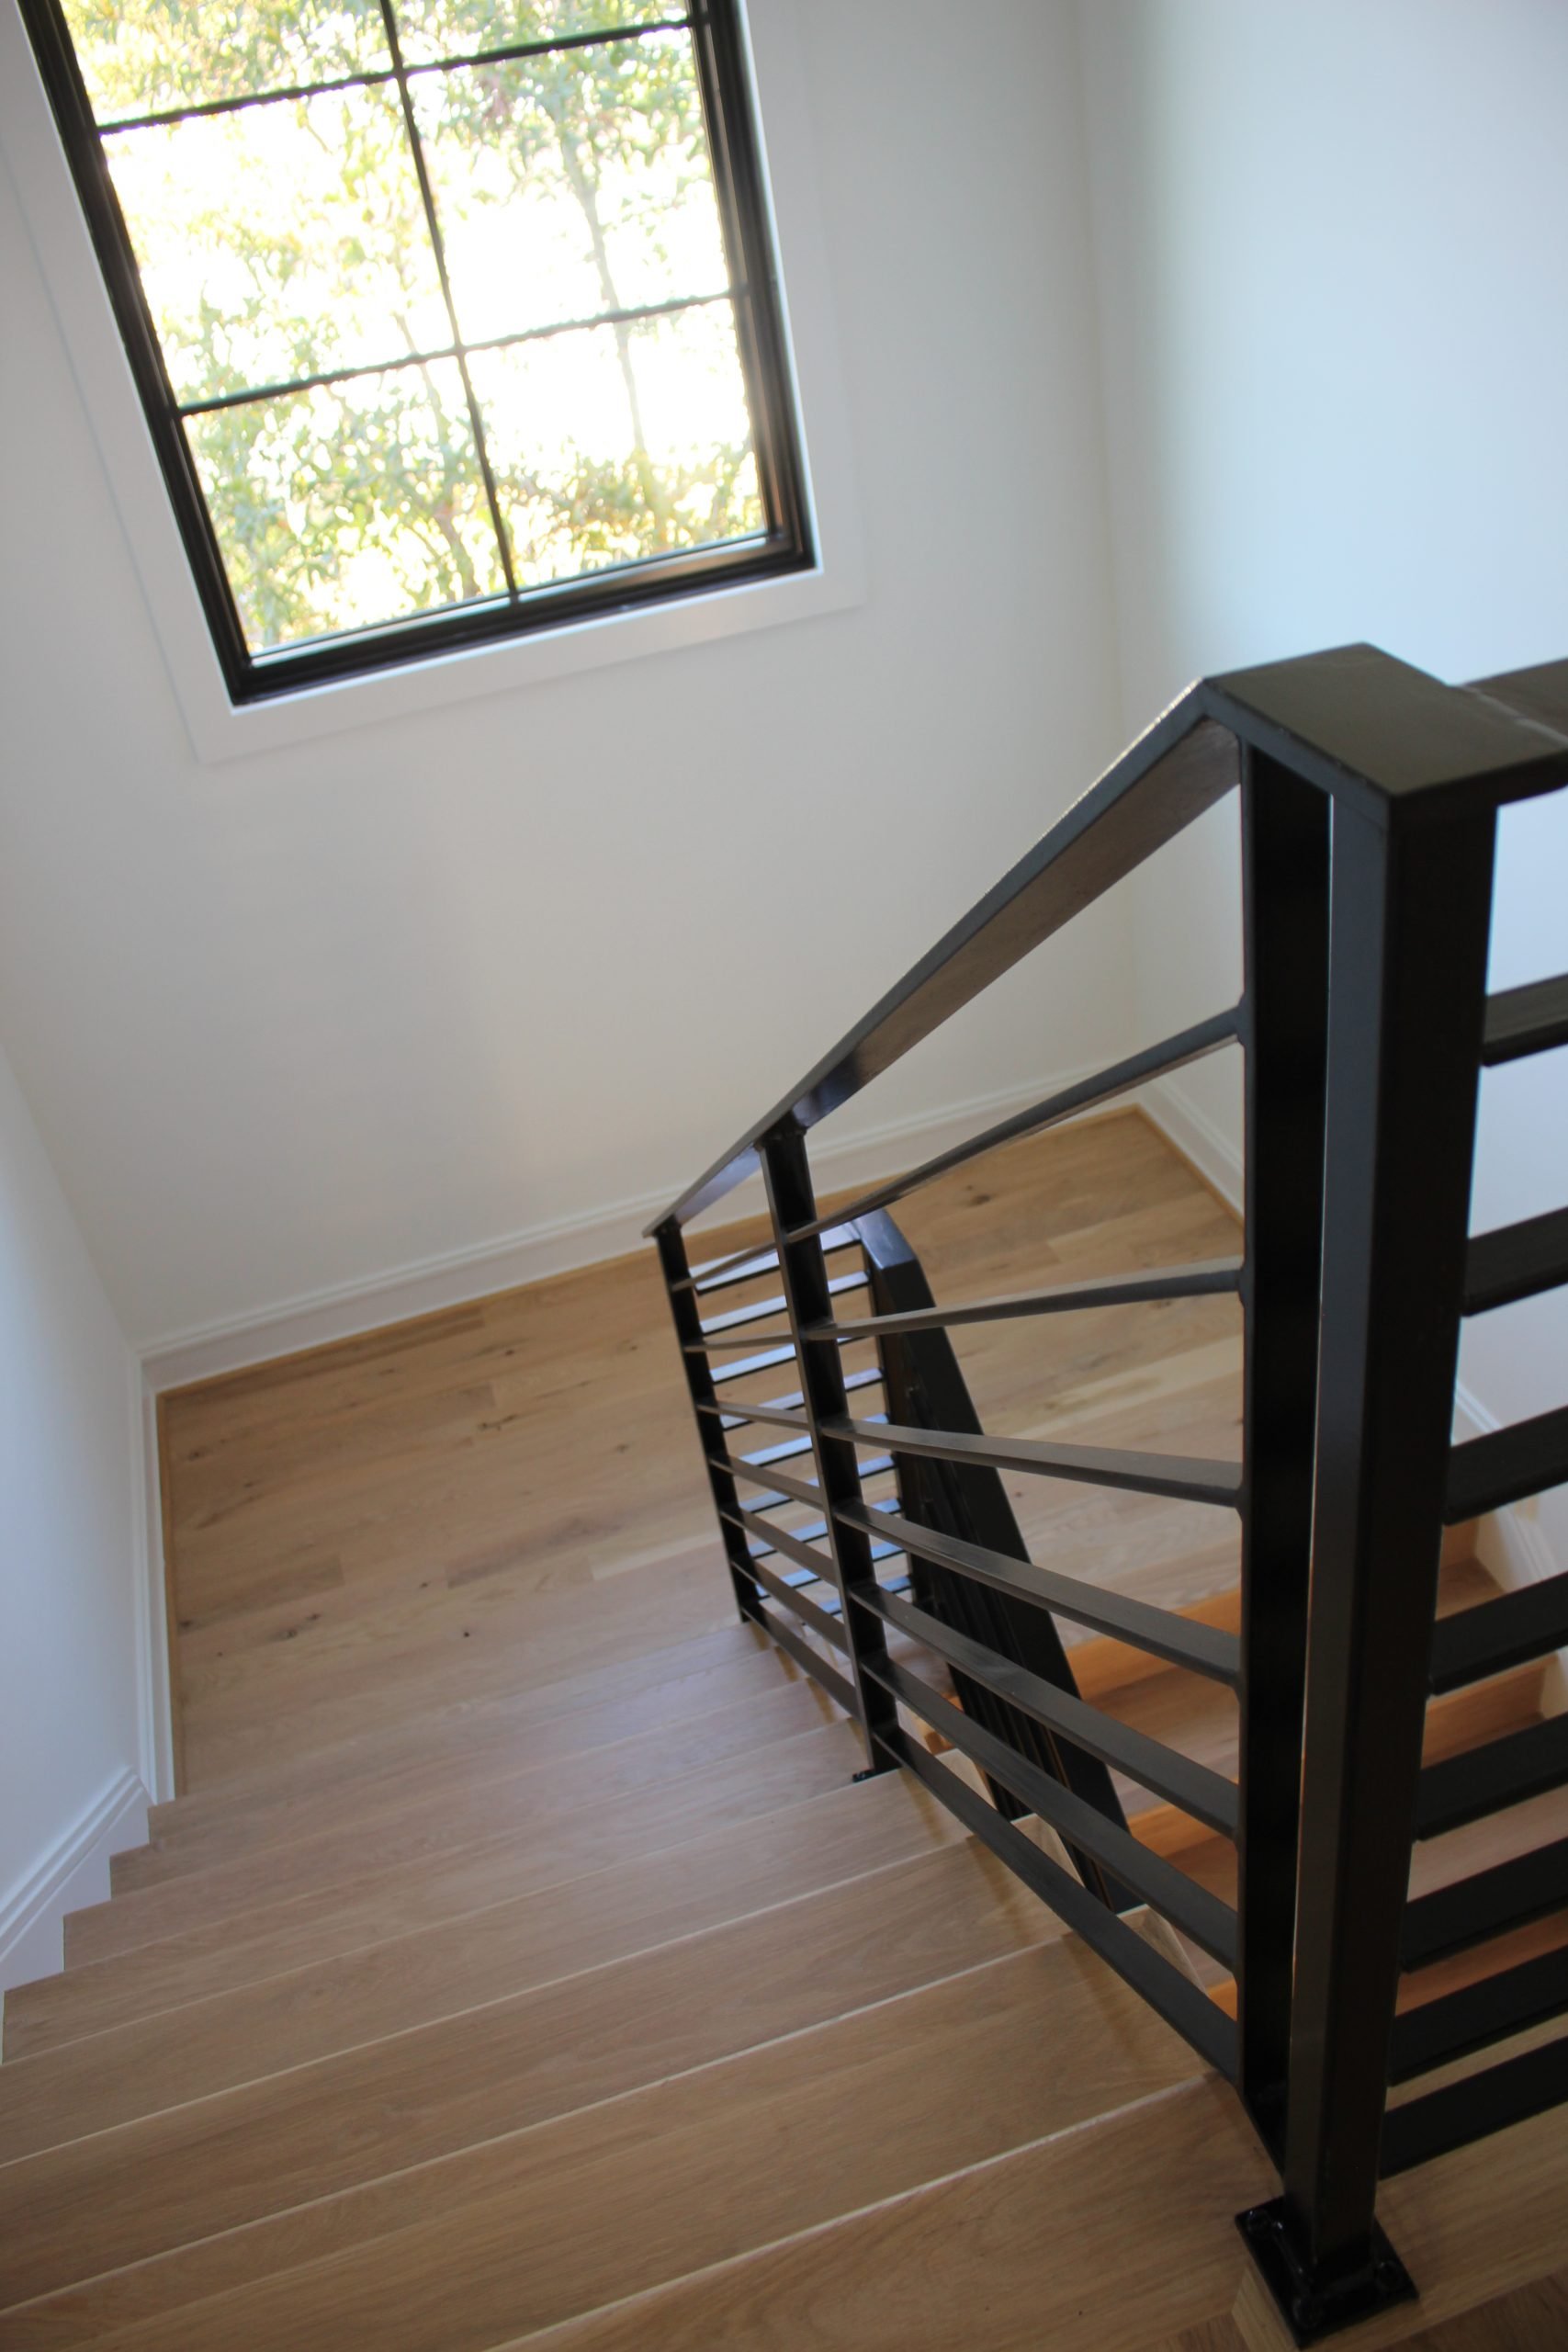 This showcases a completed loudoun stairs project within a home in northern virginia. This showcases the metal fabrication that loudoun stairs did in their shop. 